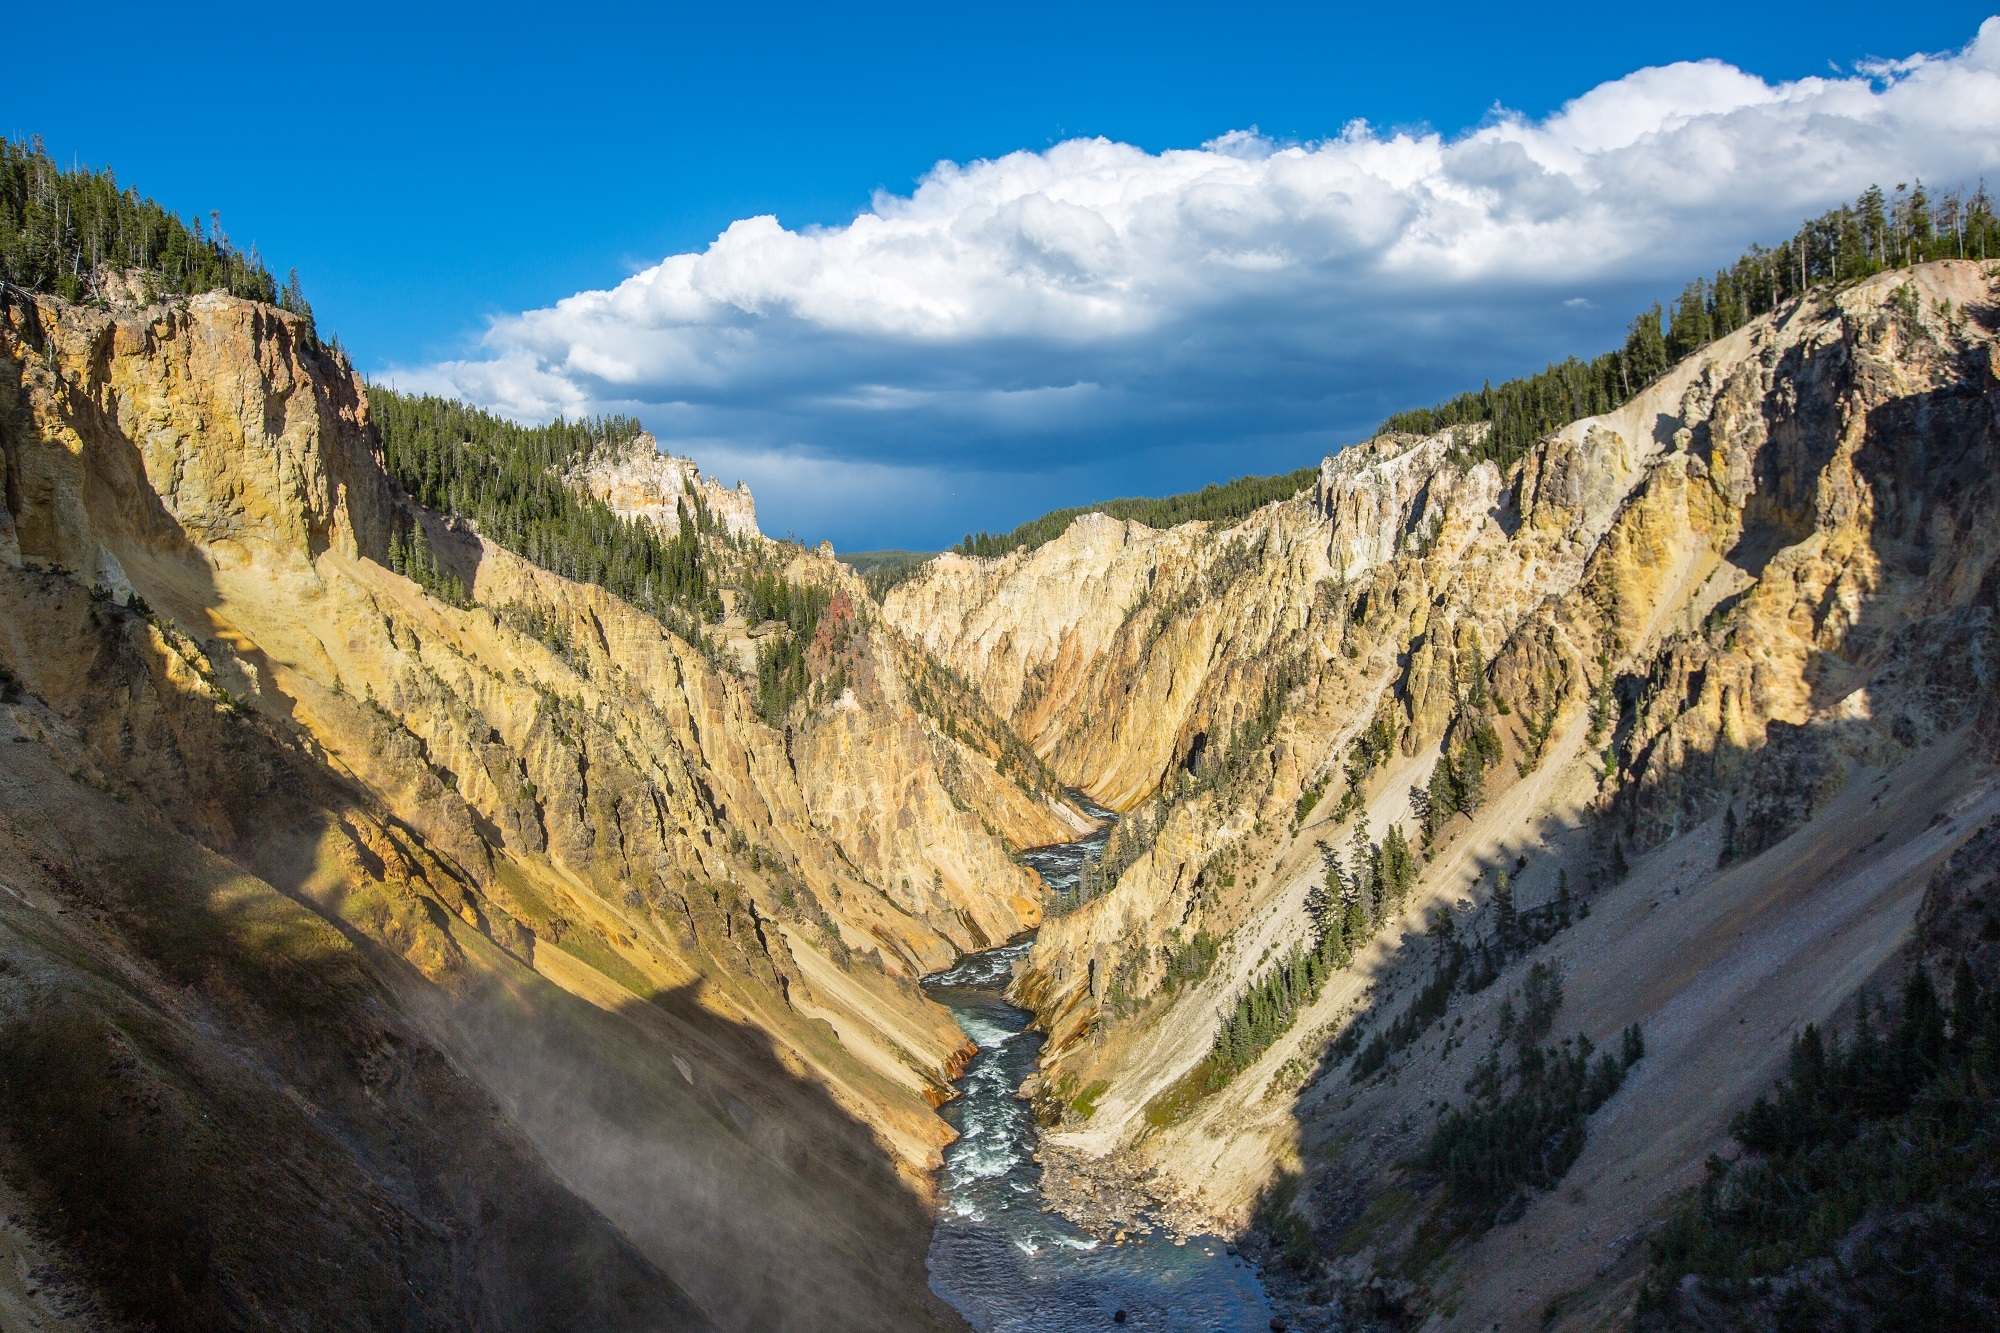 River in yellowstone National Park by skeeze